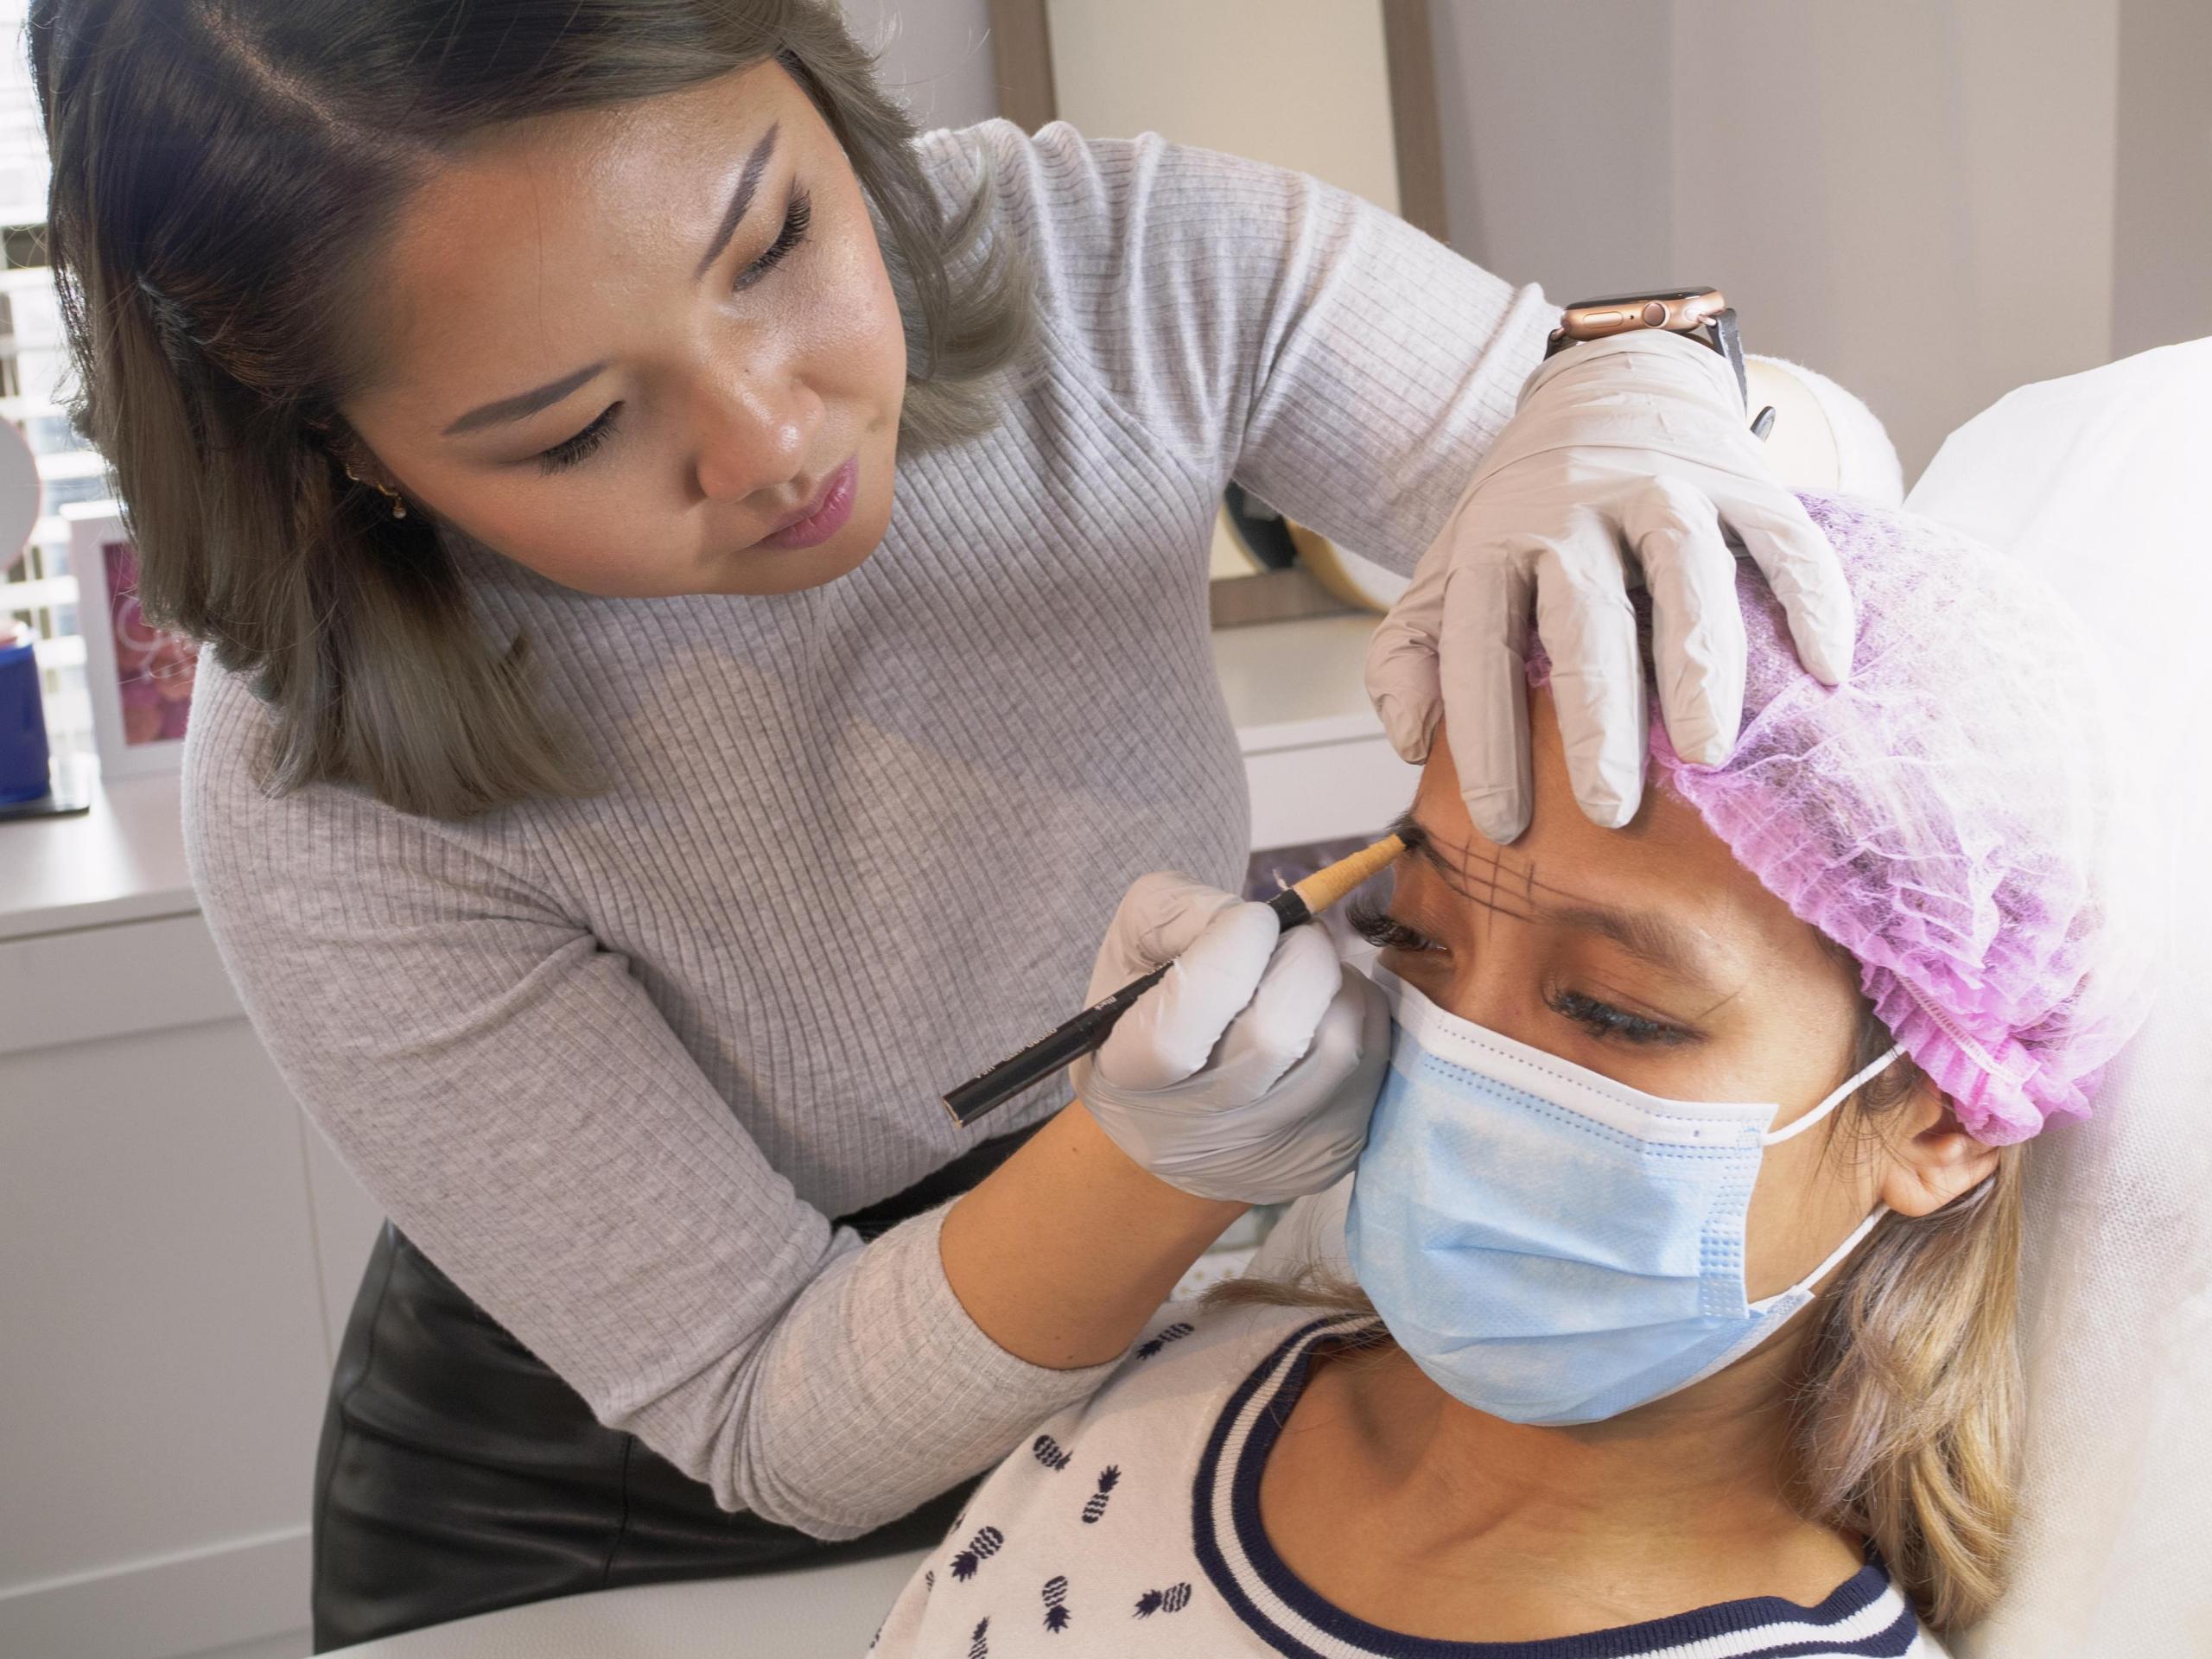 Get Top AAM Accreditation Hands-On Training At New Jersey's Top Beauty Clinic